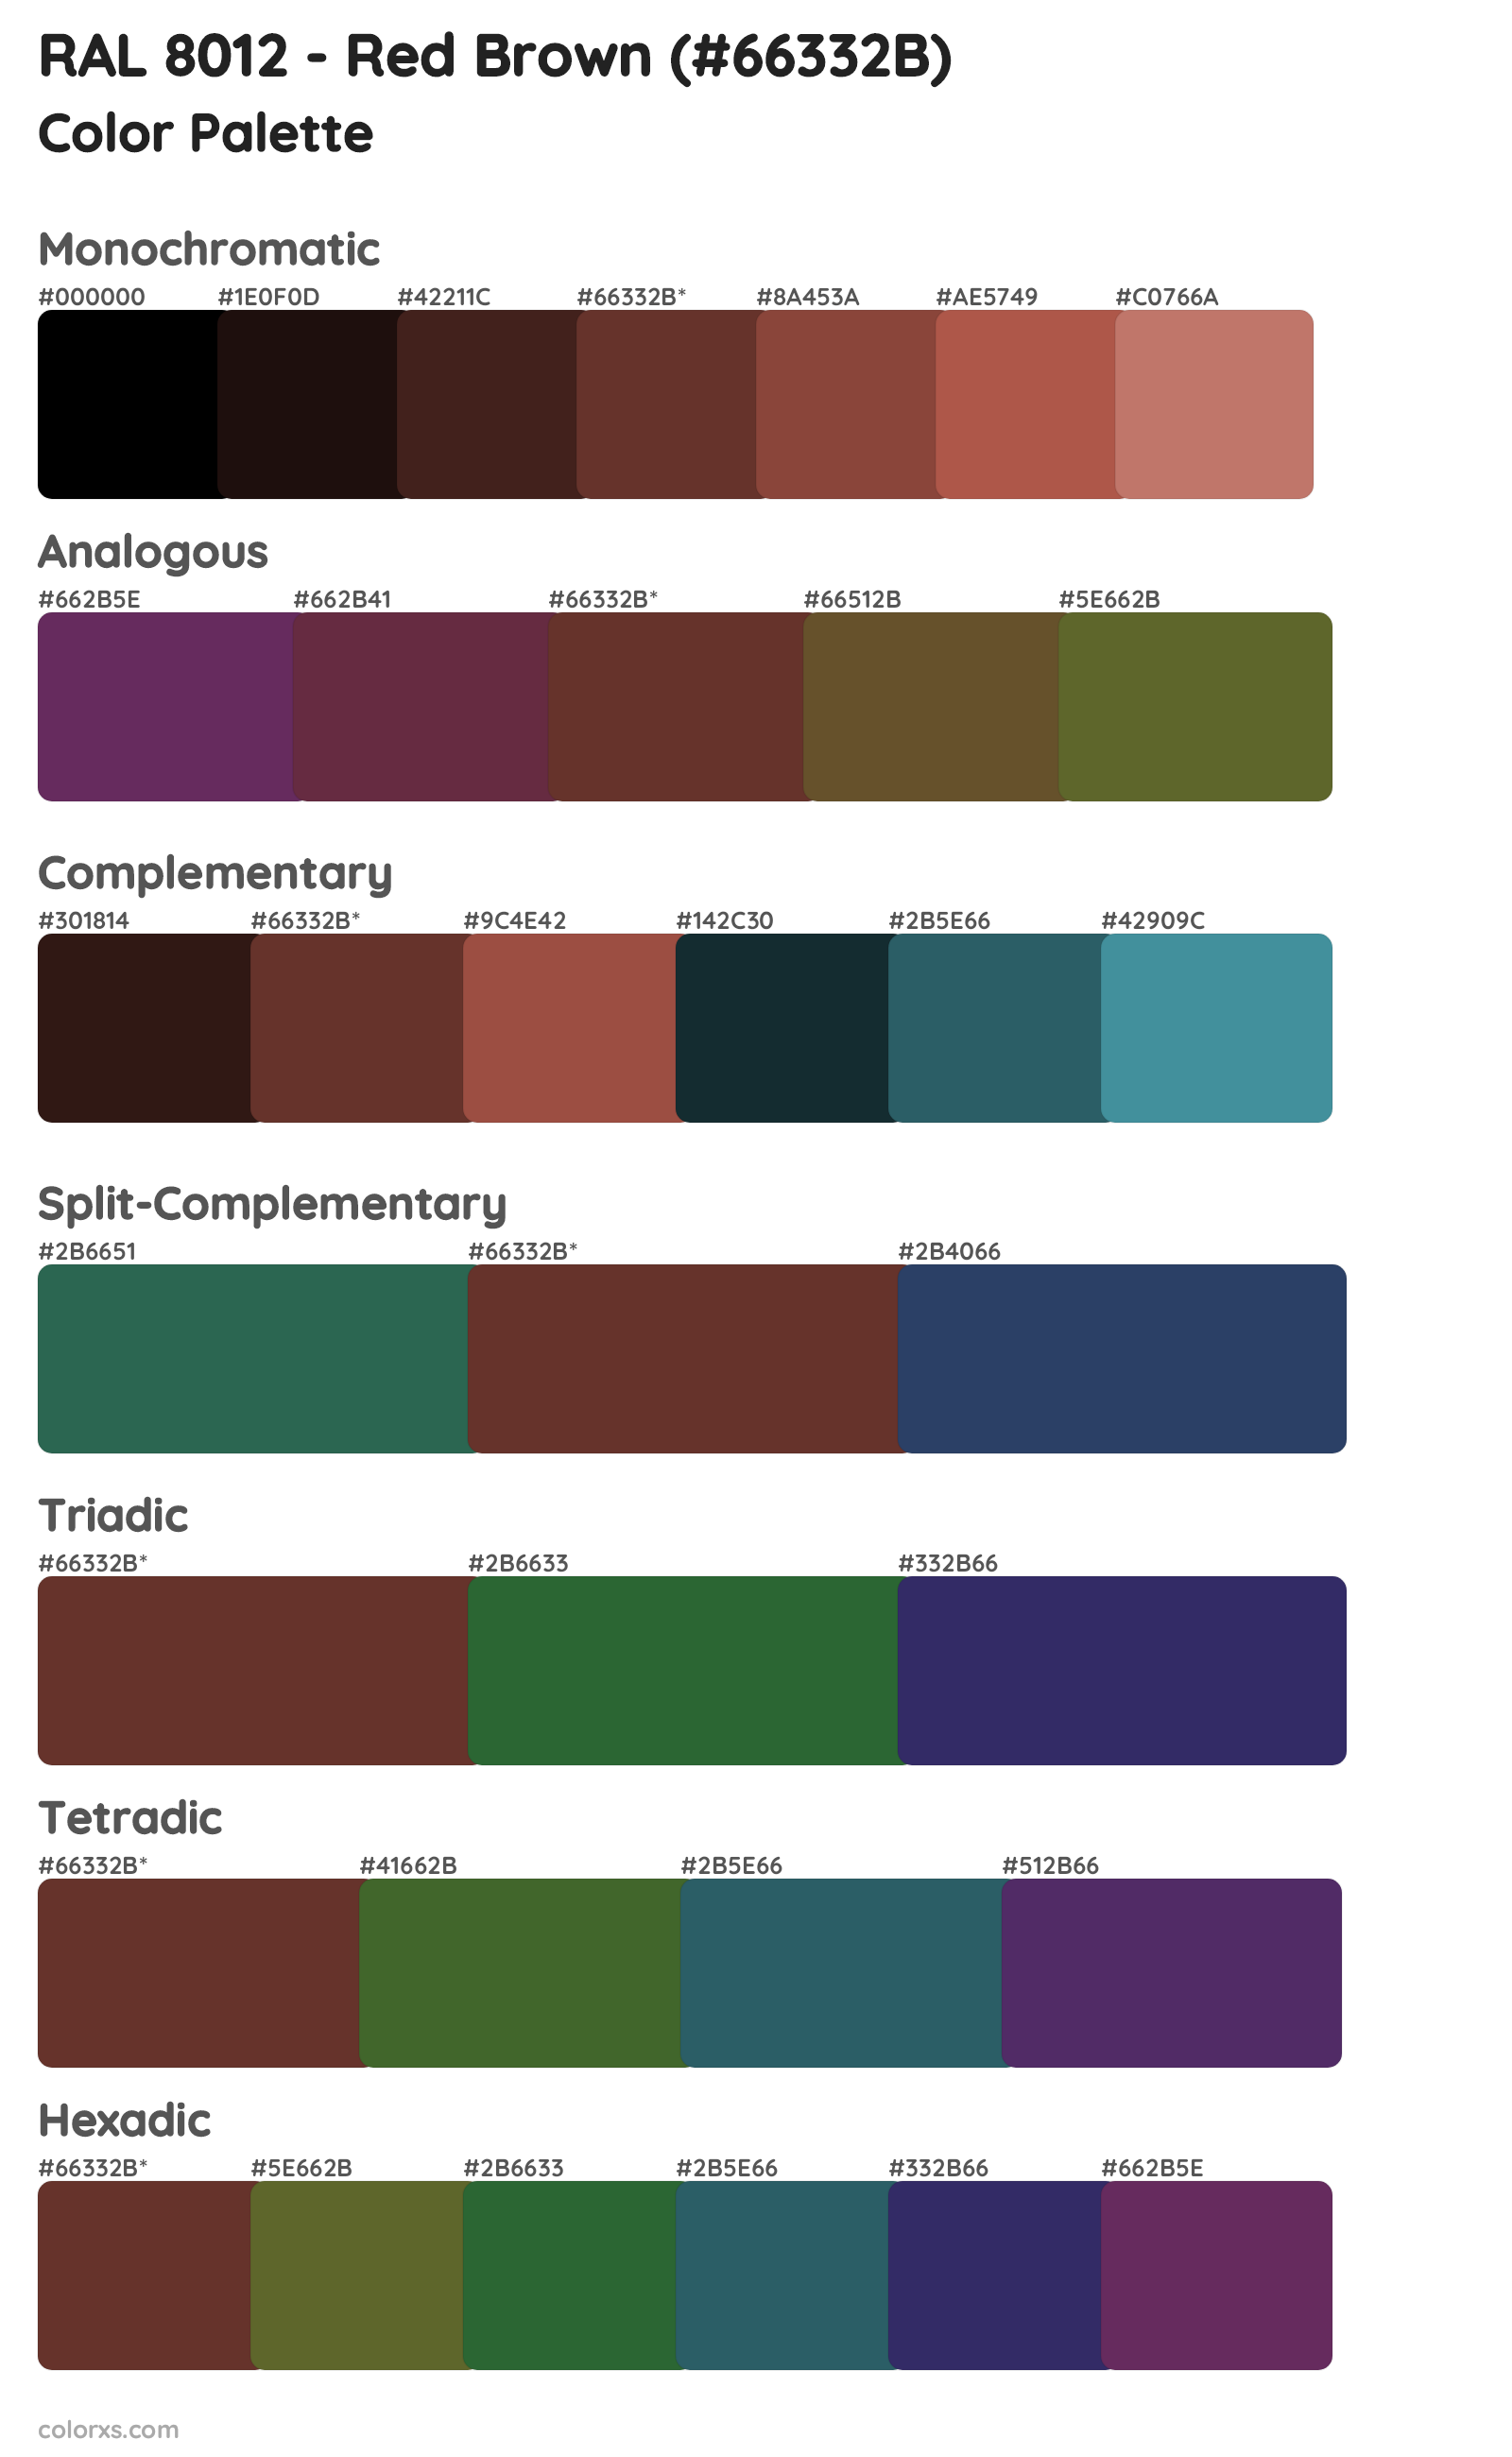 RAL 8012 - Red Brown Color Scheme Palettes